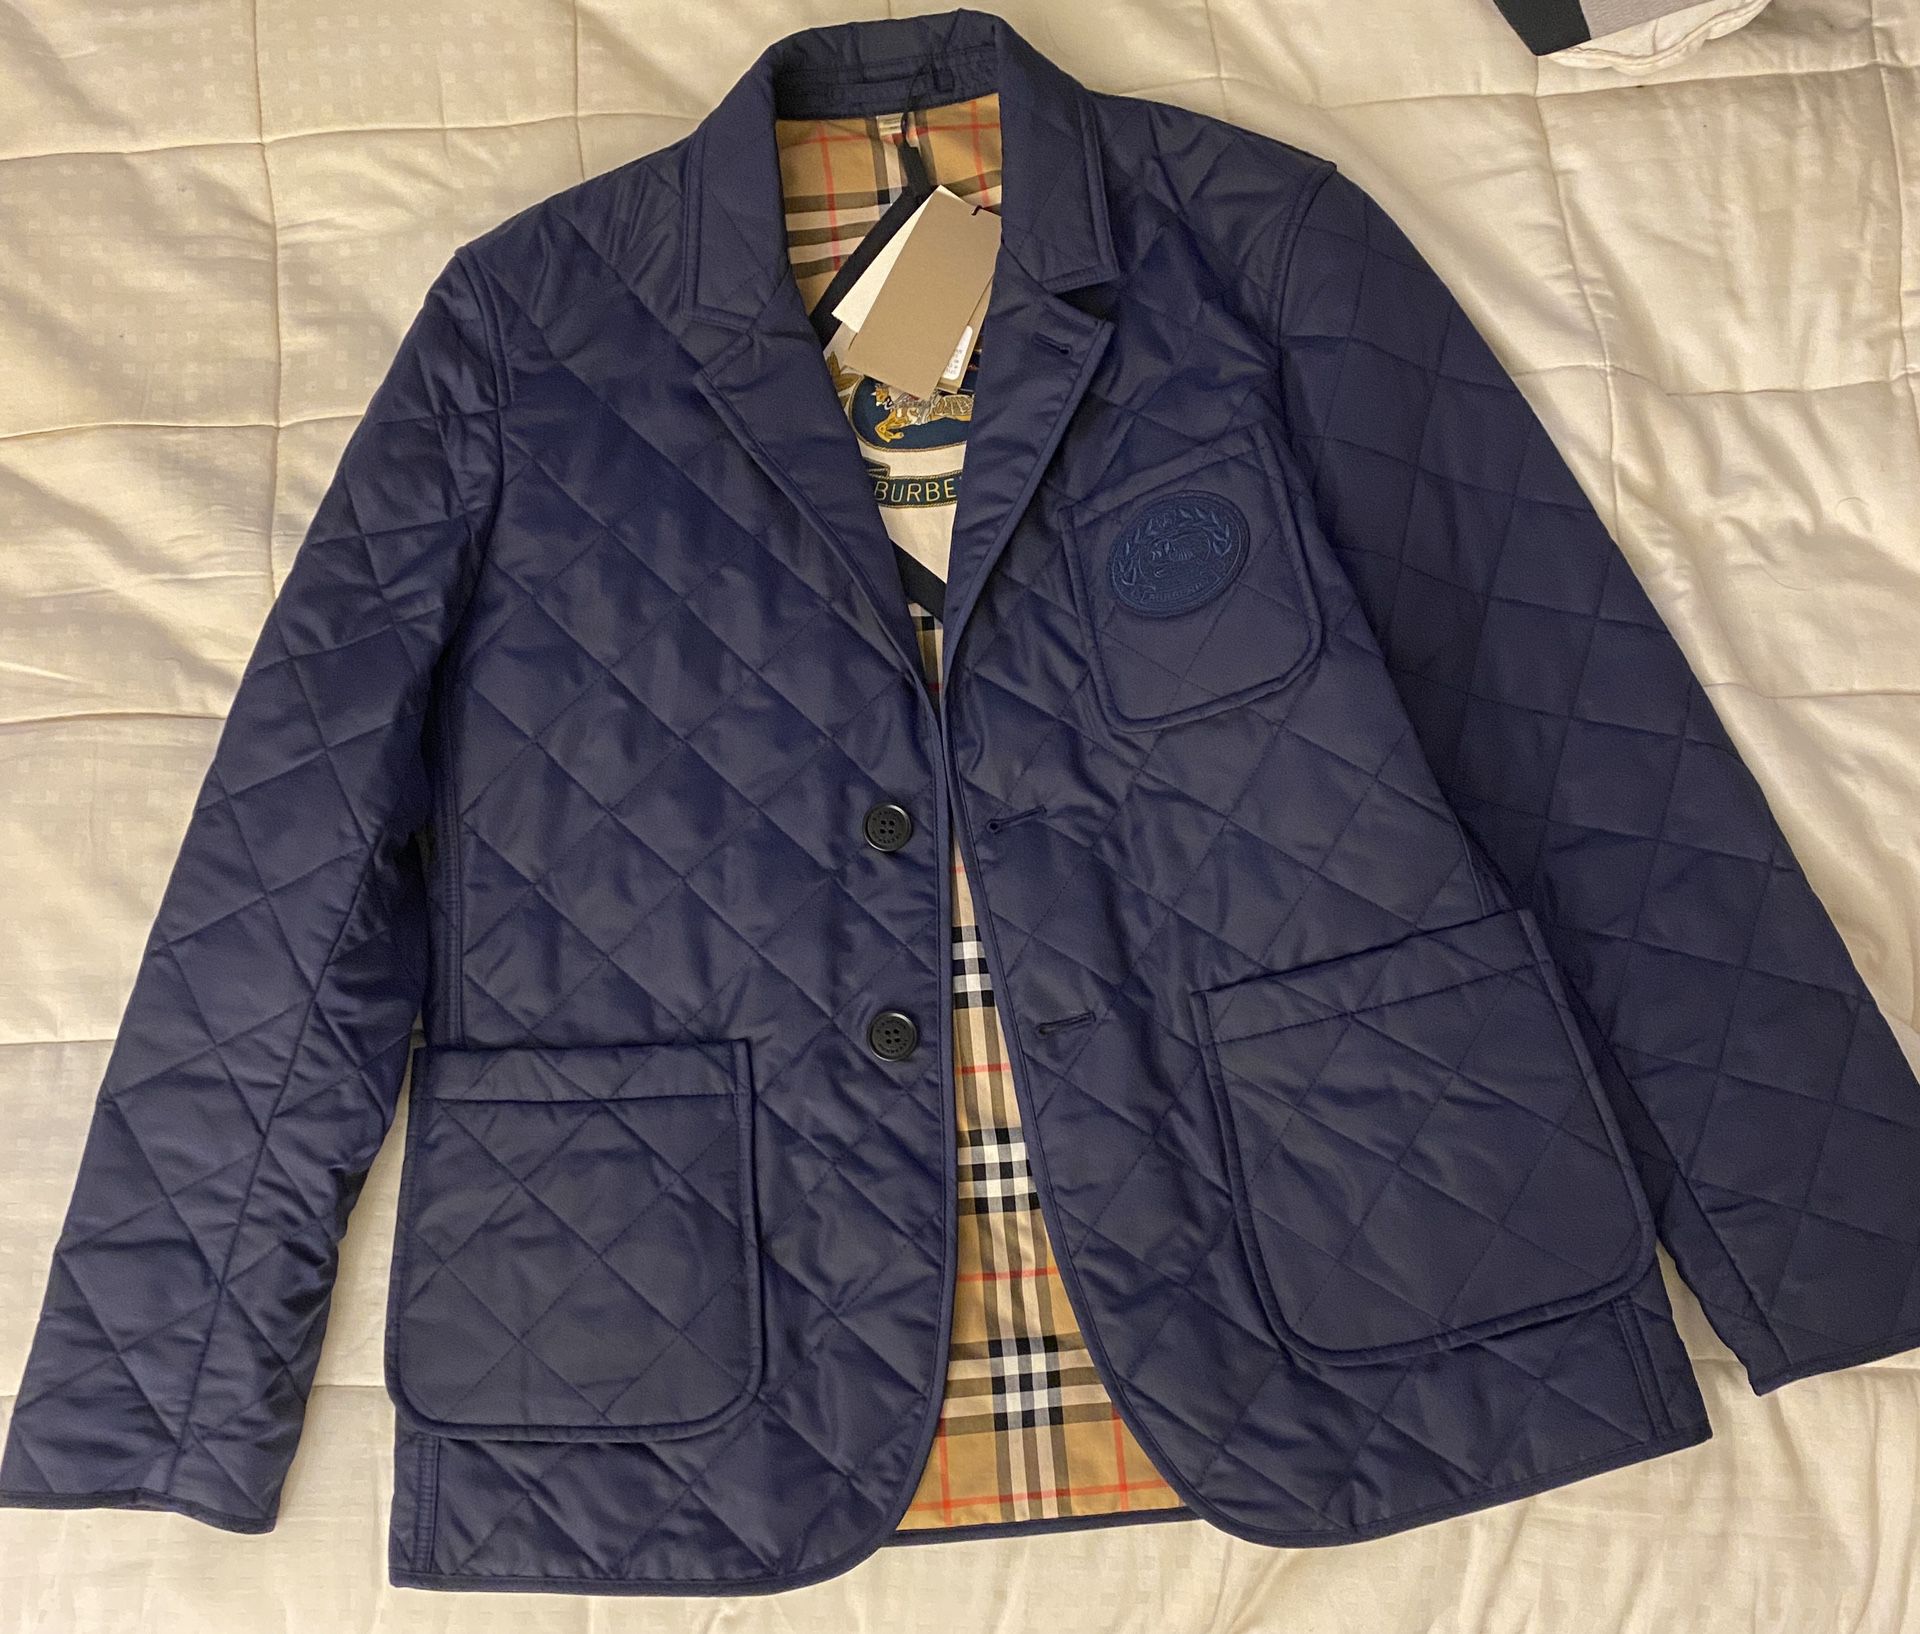 Burberry Mens Jacket Brand New With Tags